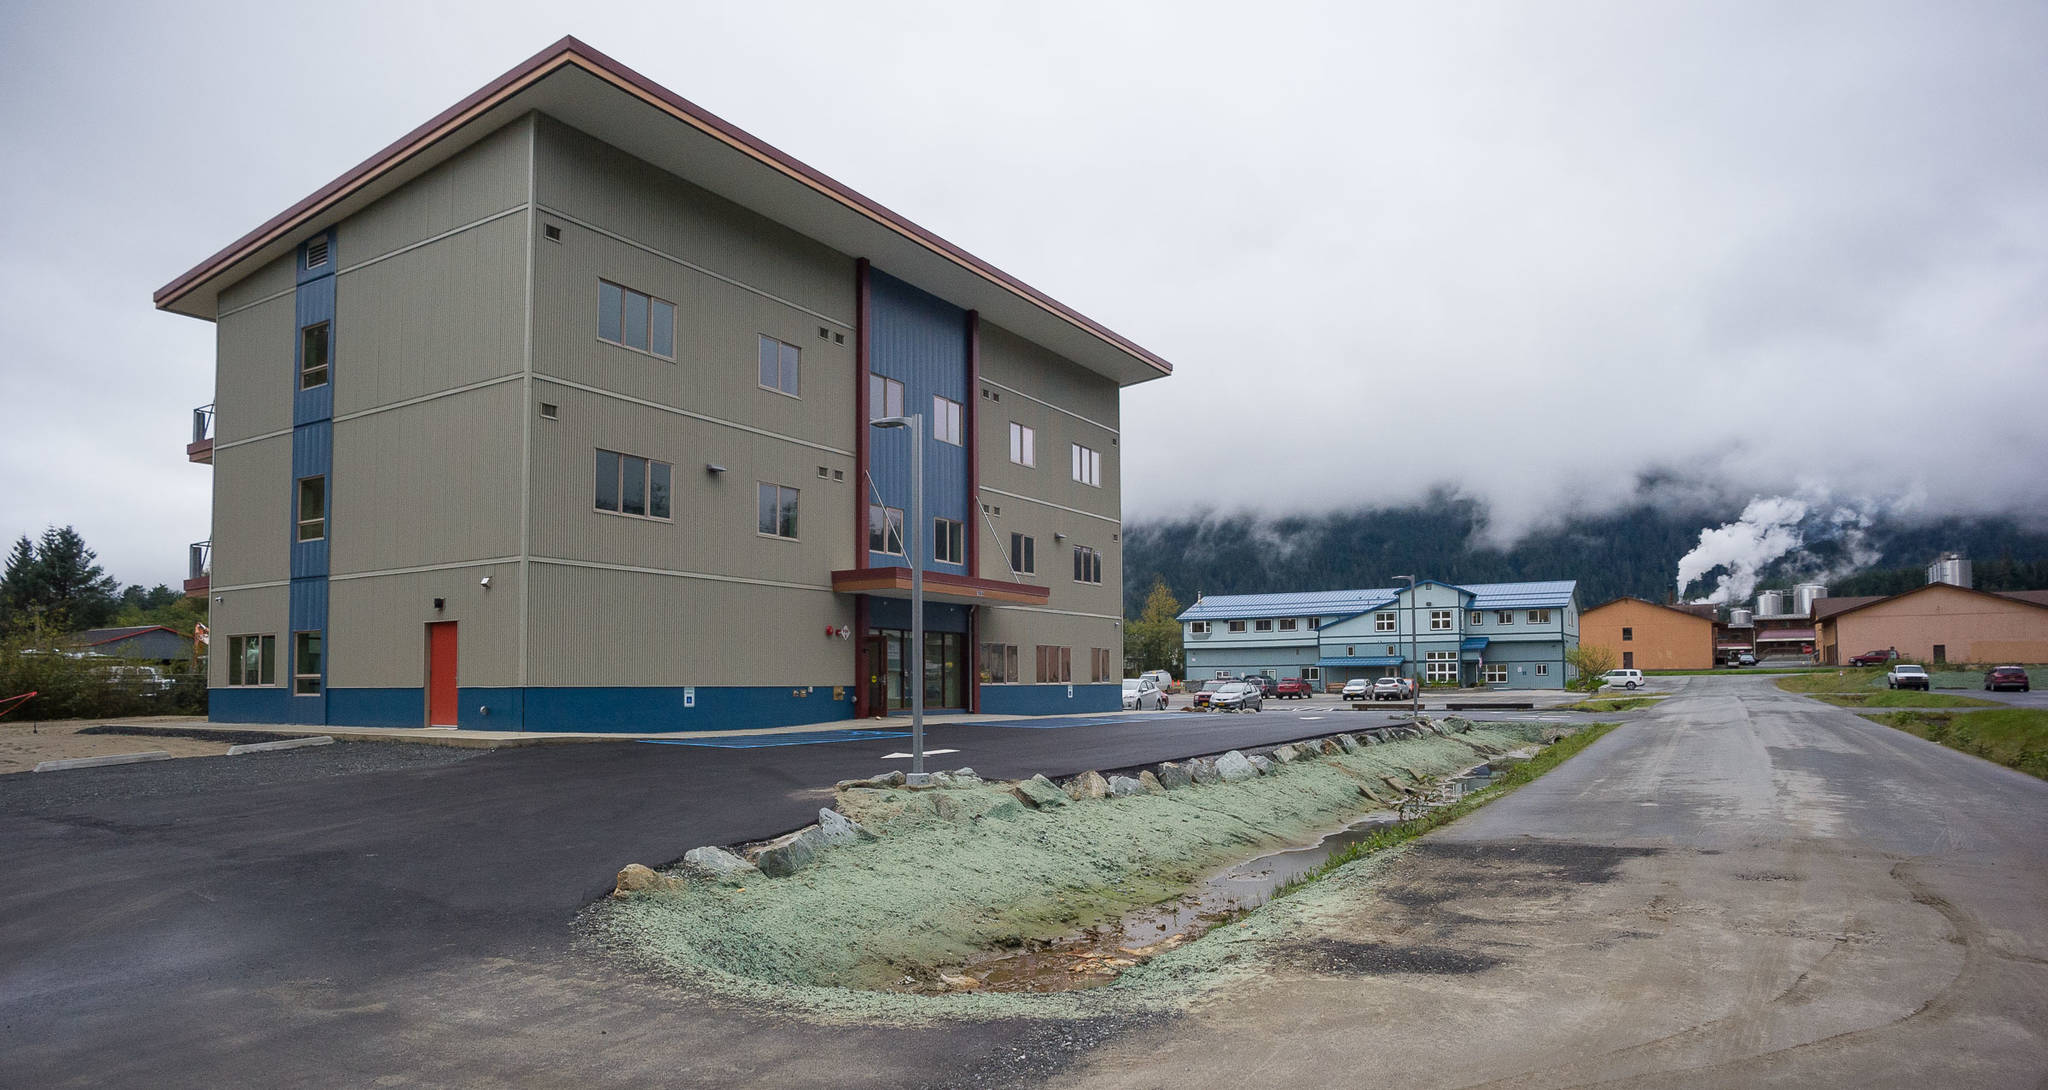 This file photo shows the finished Housing First Project on Tuesday, Sept. 19, 2017. The Juneau Community Foundation announced $1.8 million in grants today, some of which will go to Housing First. (Michael Penn | Juneau Empire)